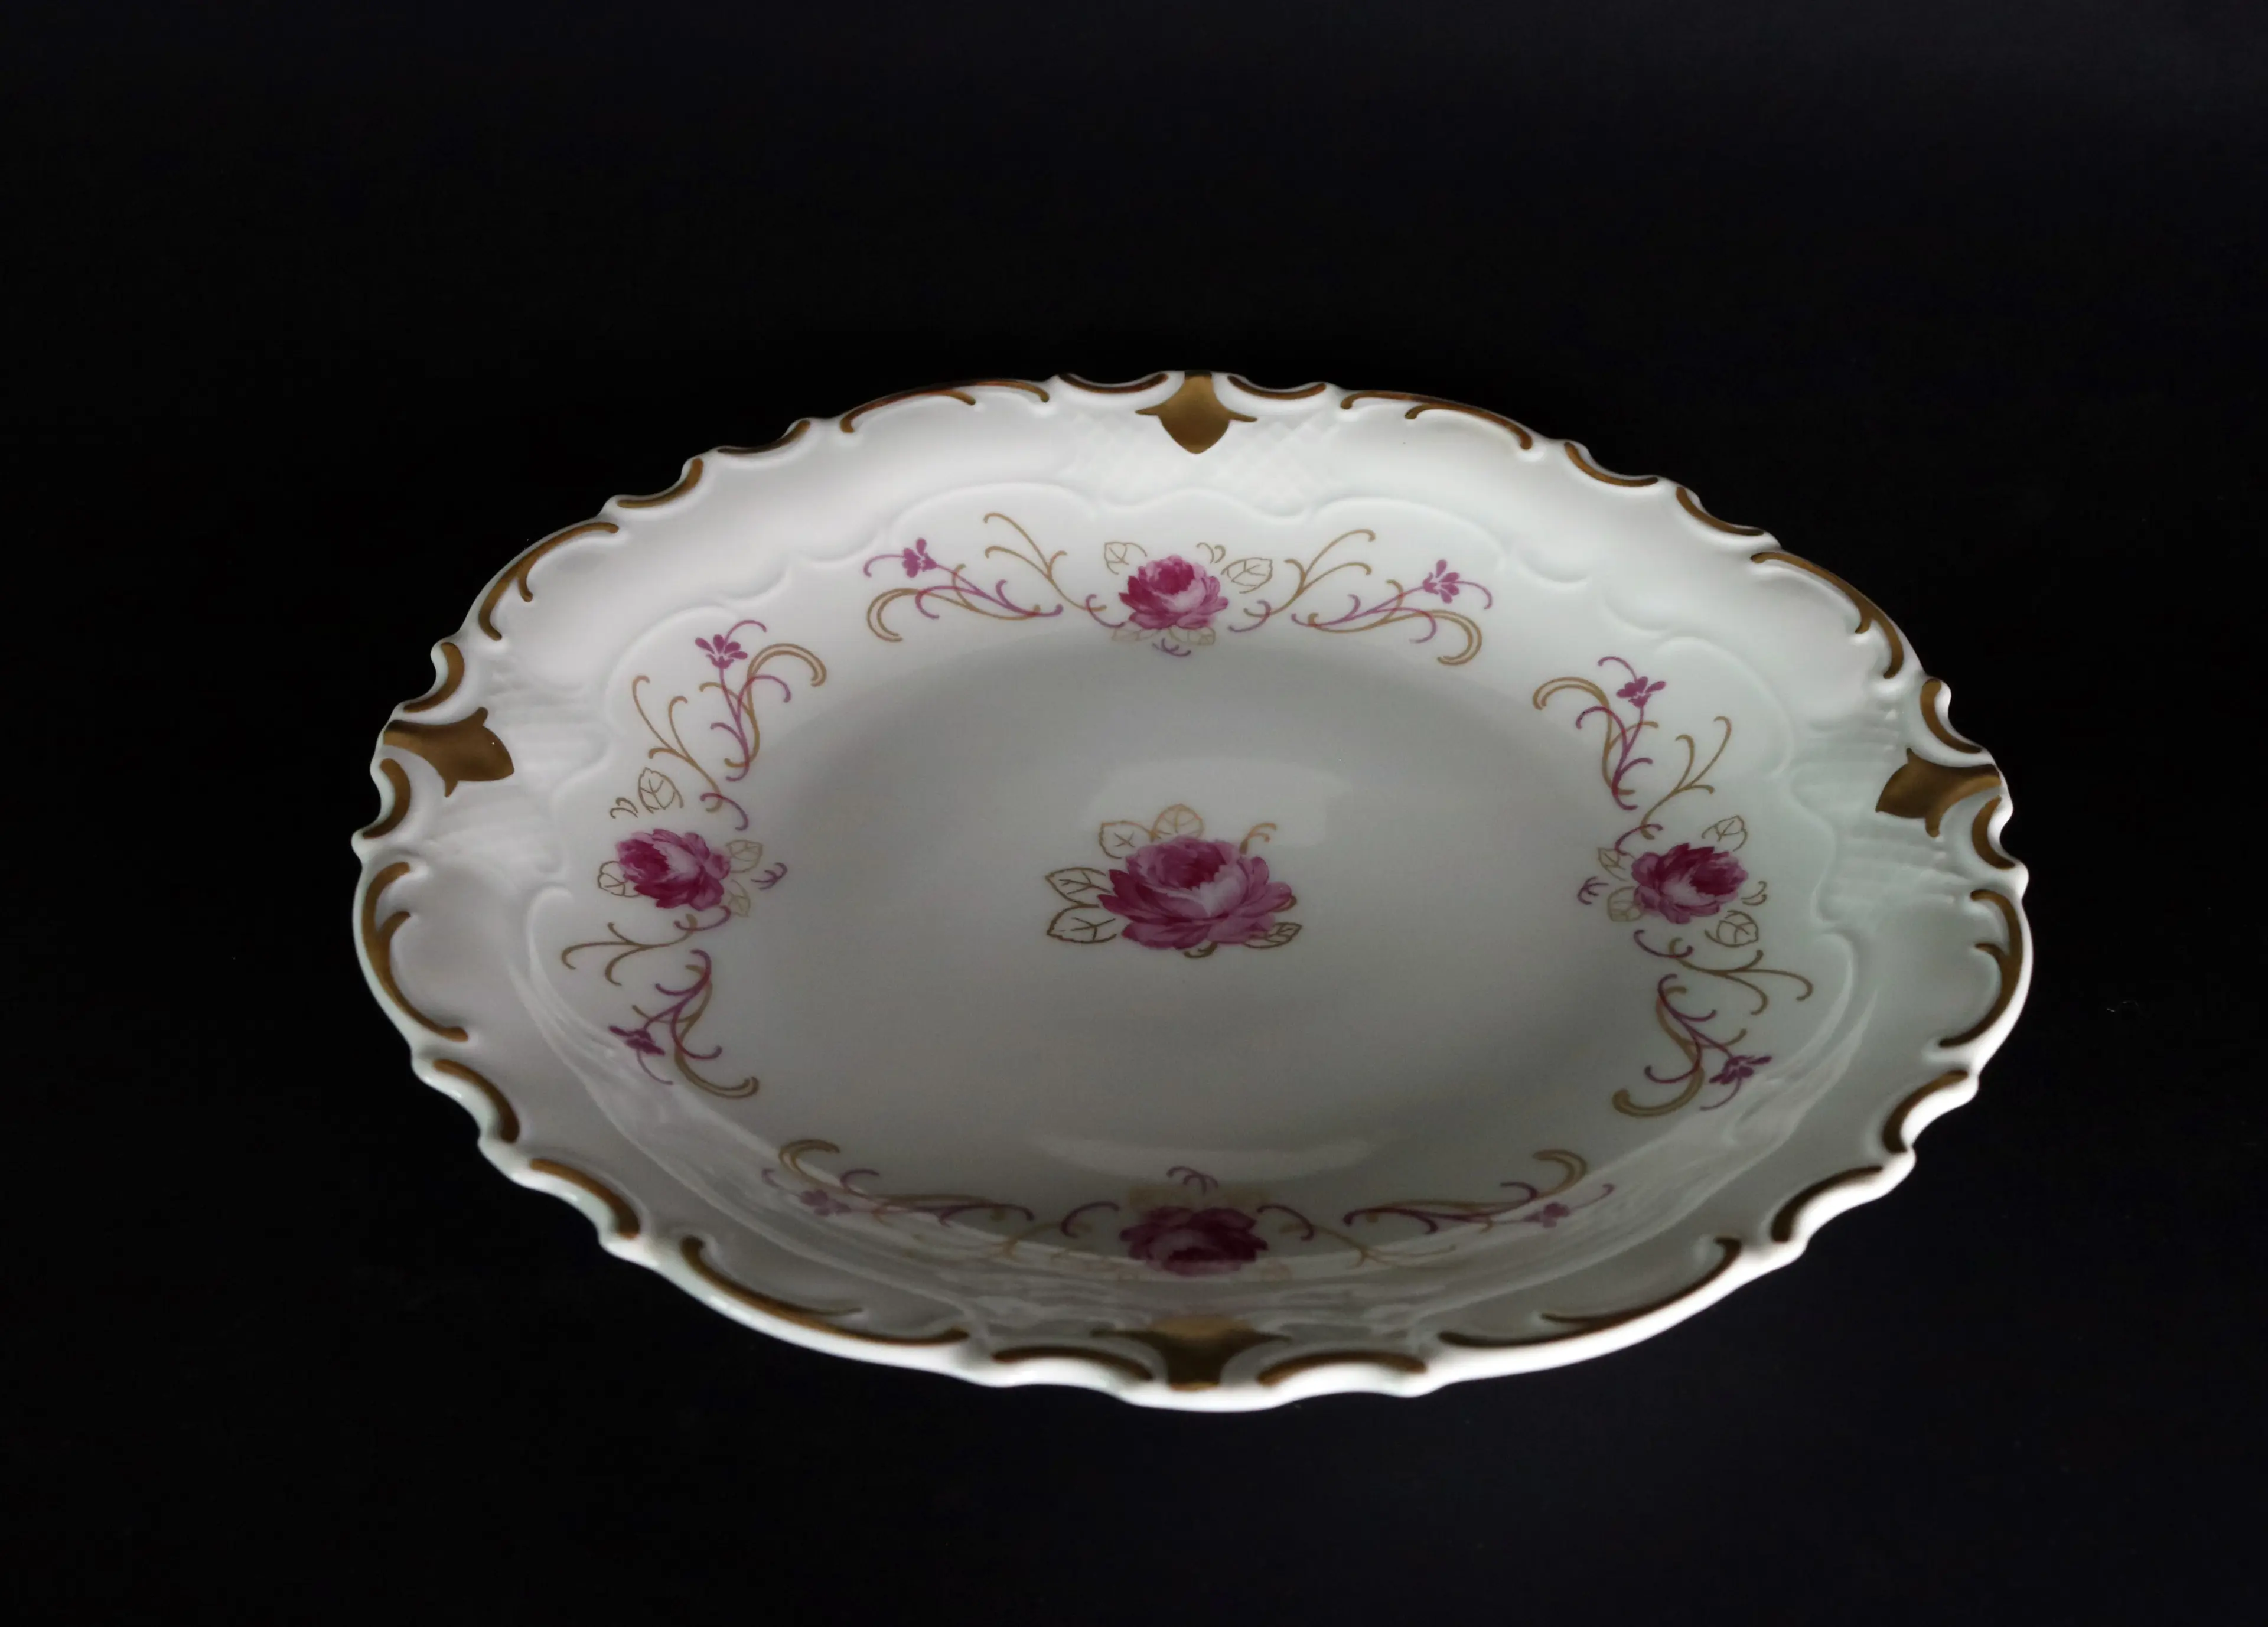 Porcelain Plate With Flowers